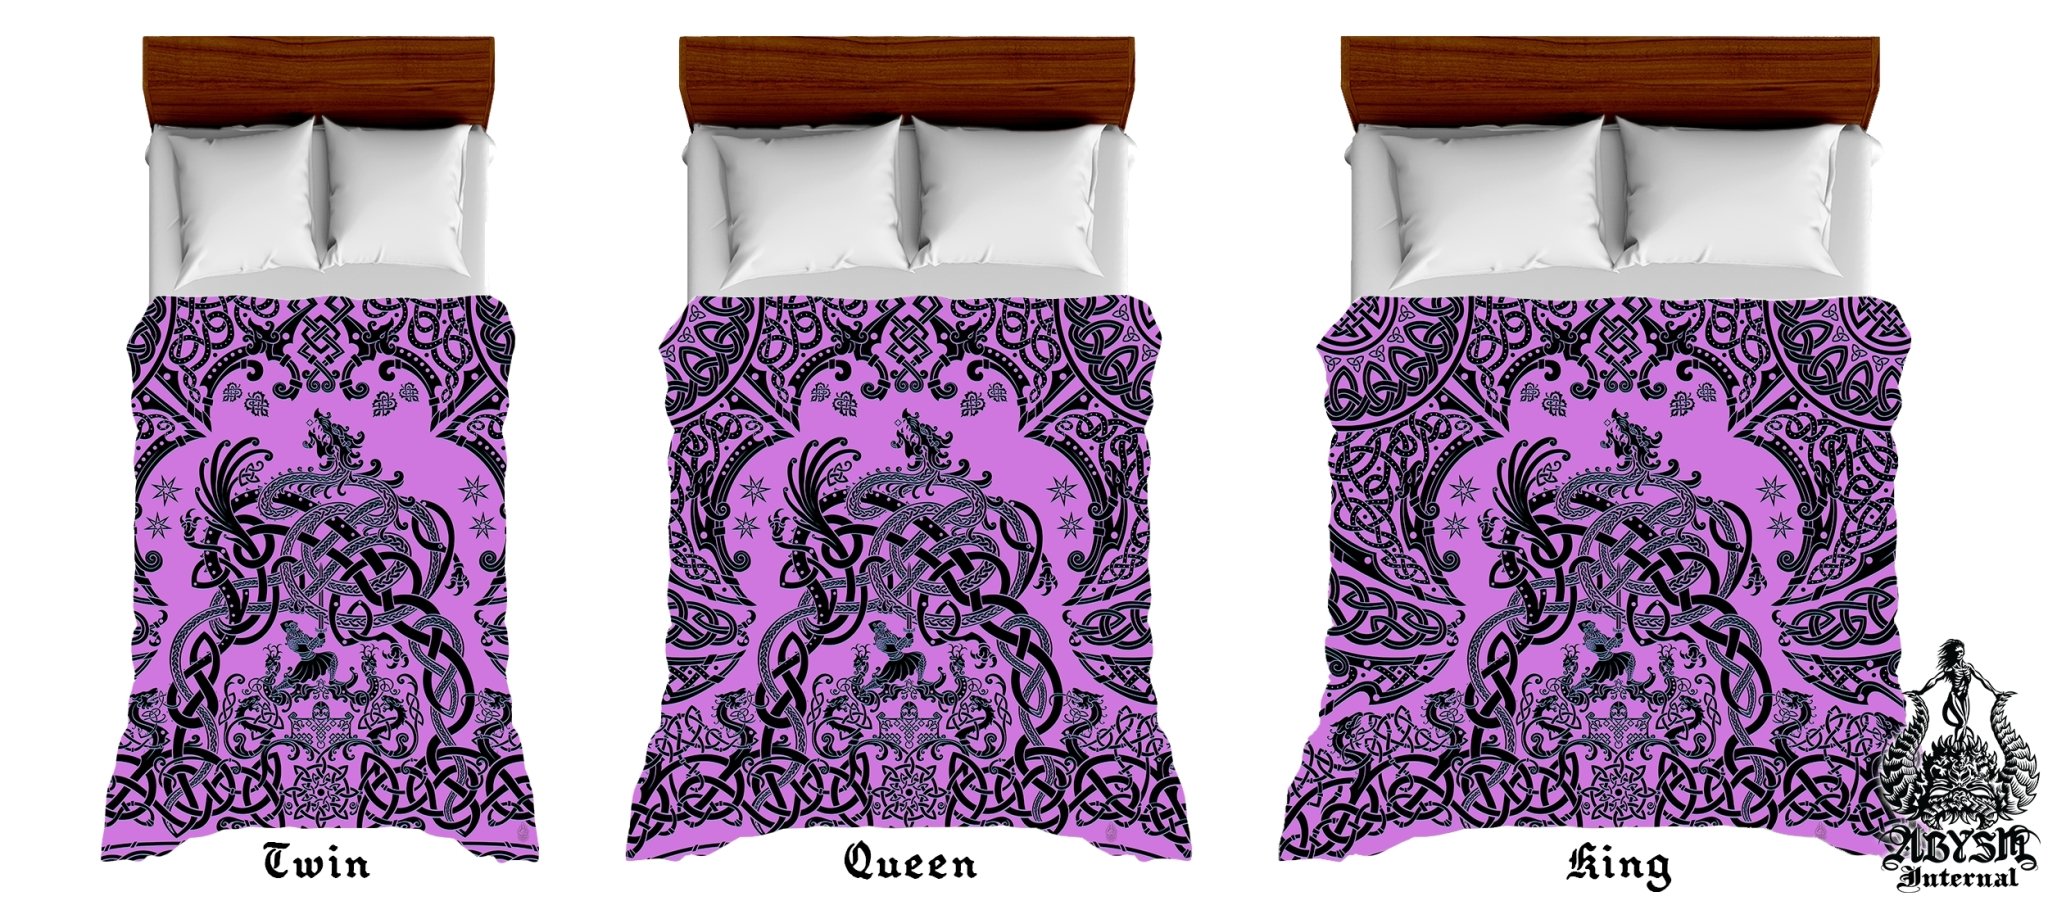 Viking Bedding Set, Comforter and Duvet, Norse Bed Cover and Bedroom Decor, Nordic Art, Sigurd kills Dragon Fafnir, King, Queen and Twin Size - Pastel Goth - Abysm Internal